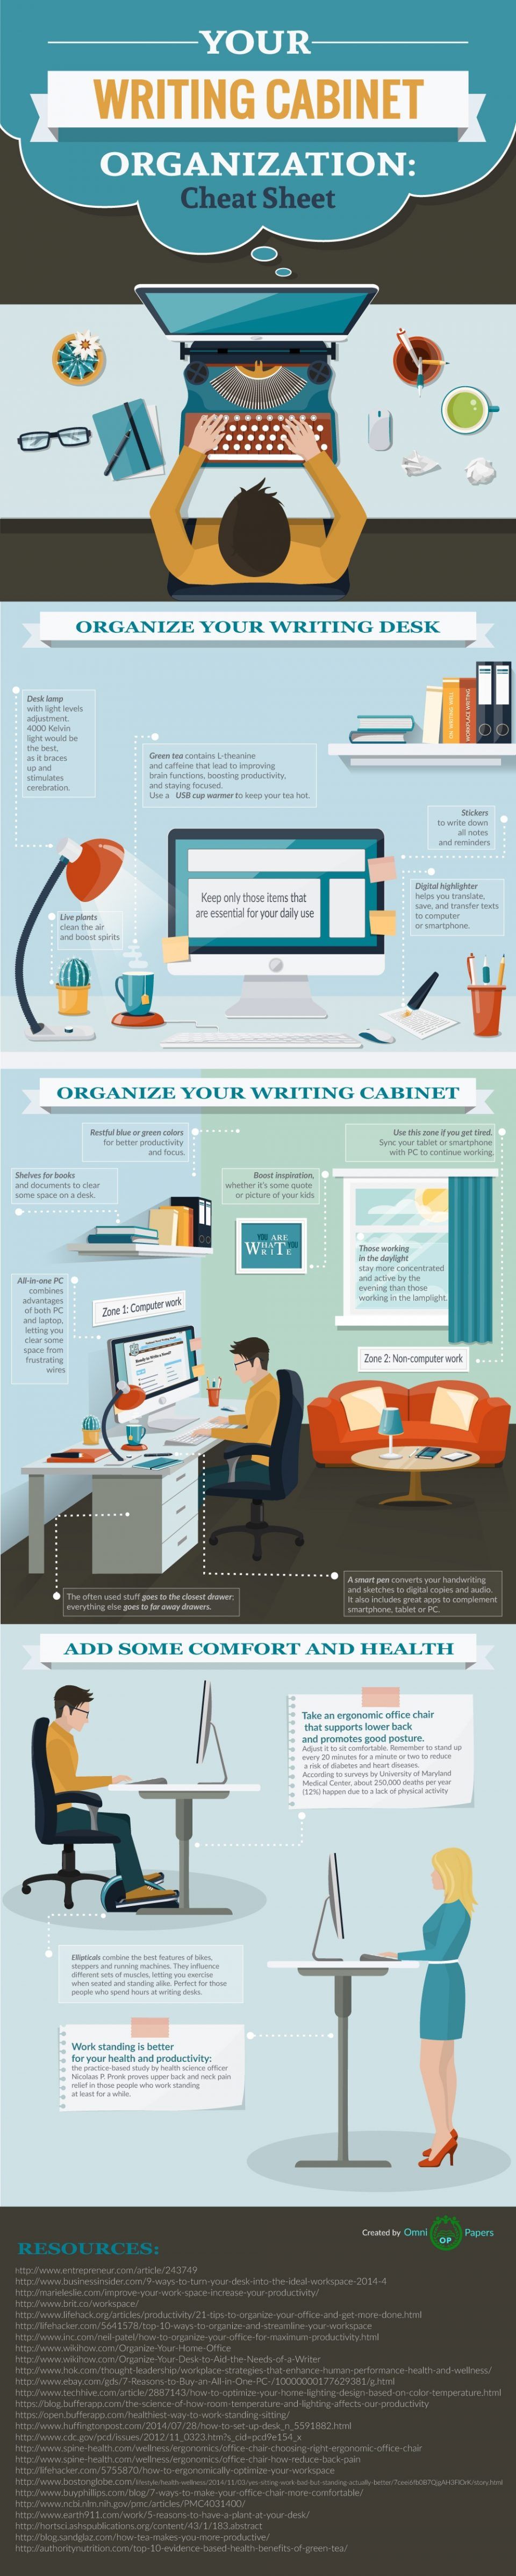 How to Organize Your Workplace for Better Productivity Infographic